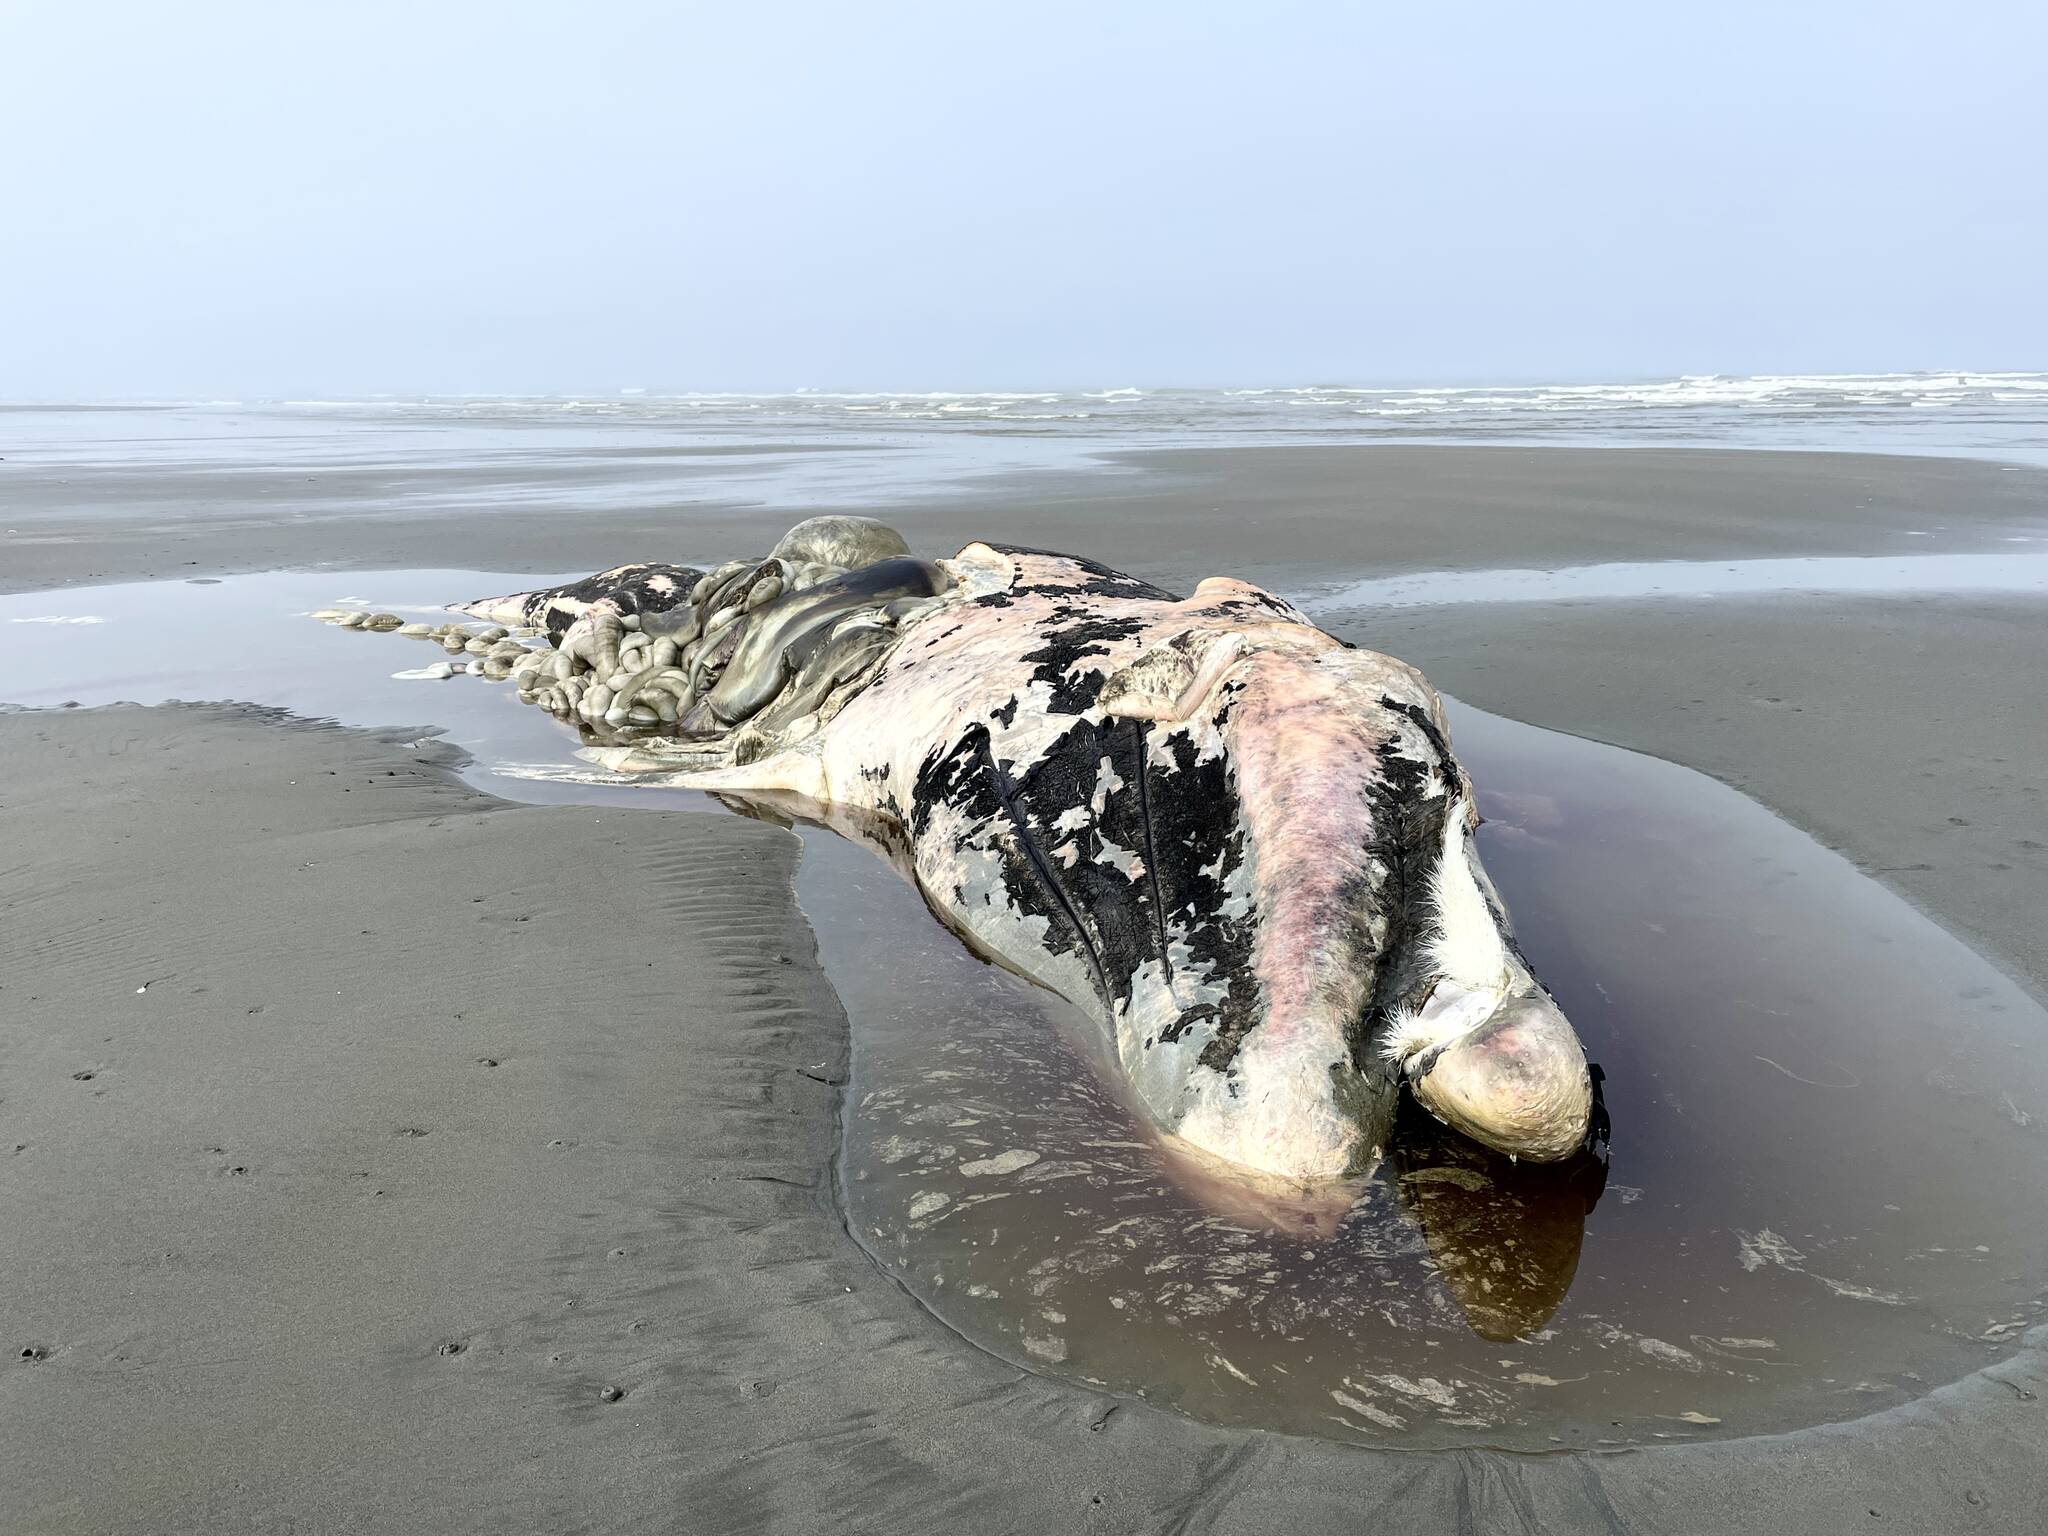 Michael S. Lockett / The Daily World
An adult gray whale washed ashore north of Ocean Shores late last week.